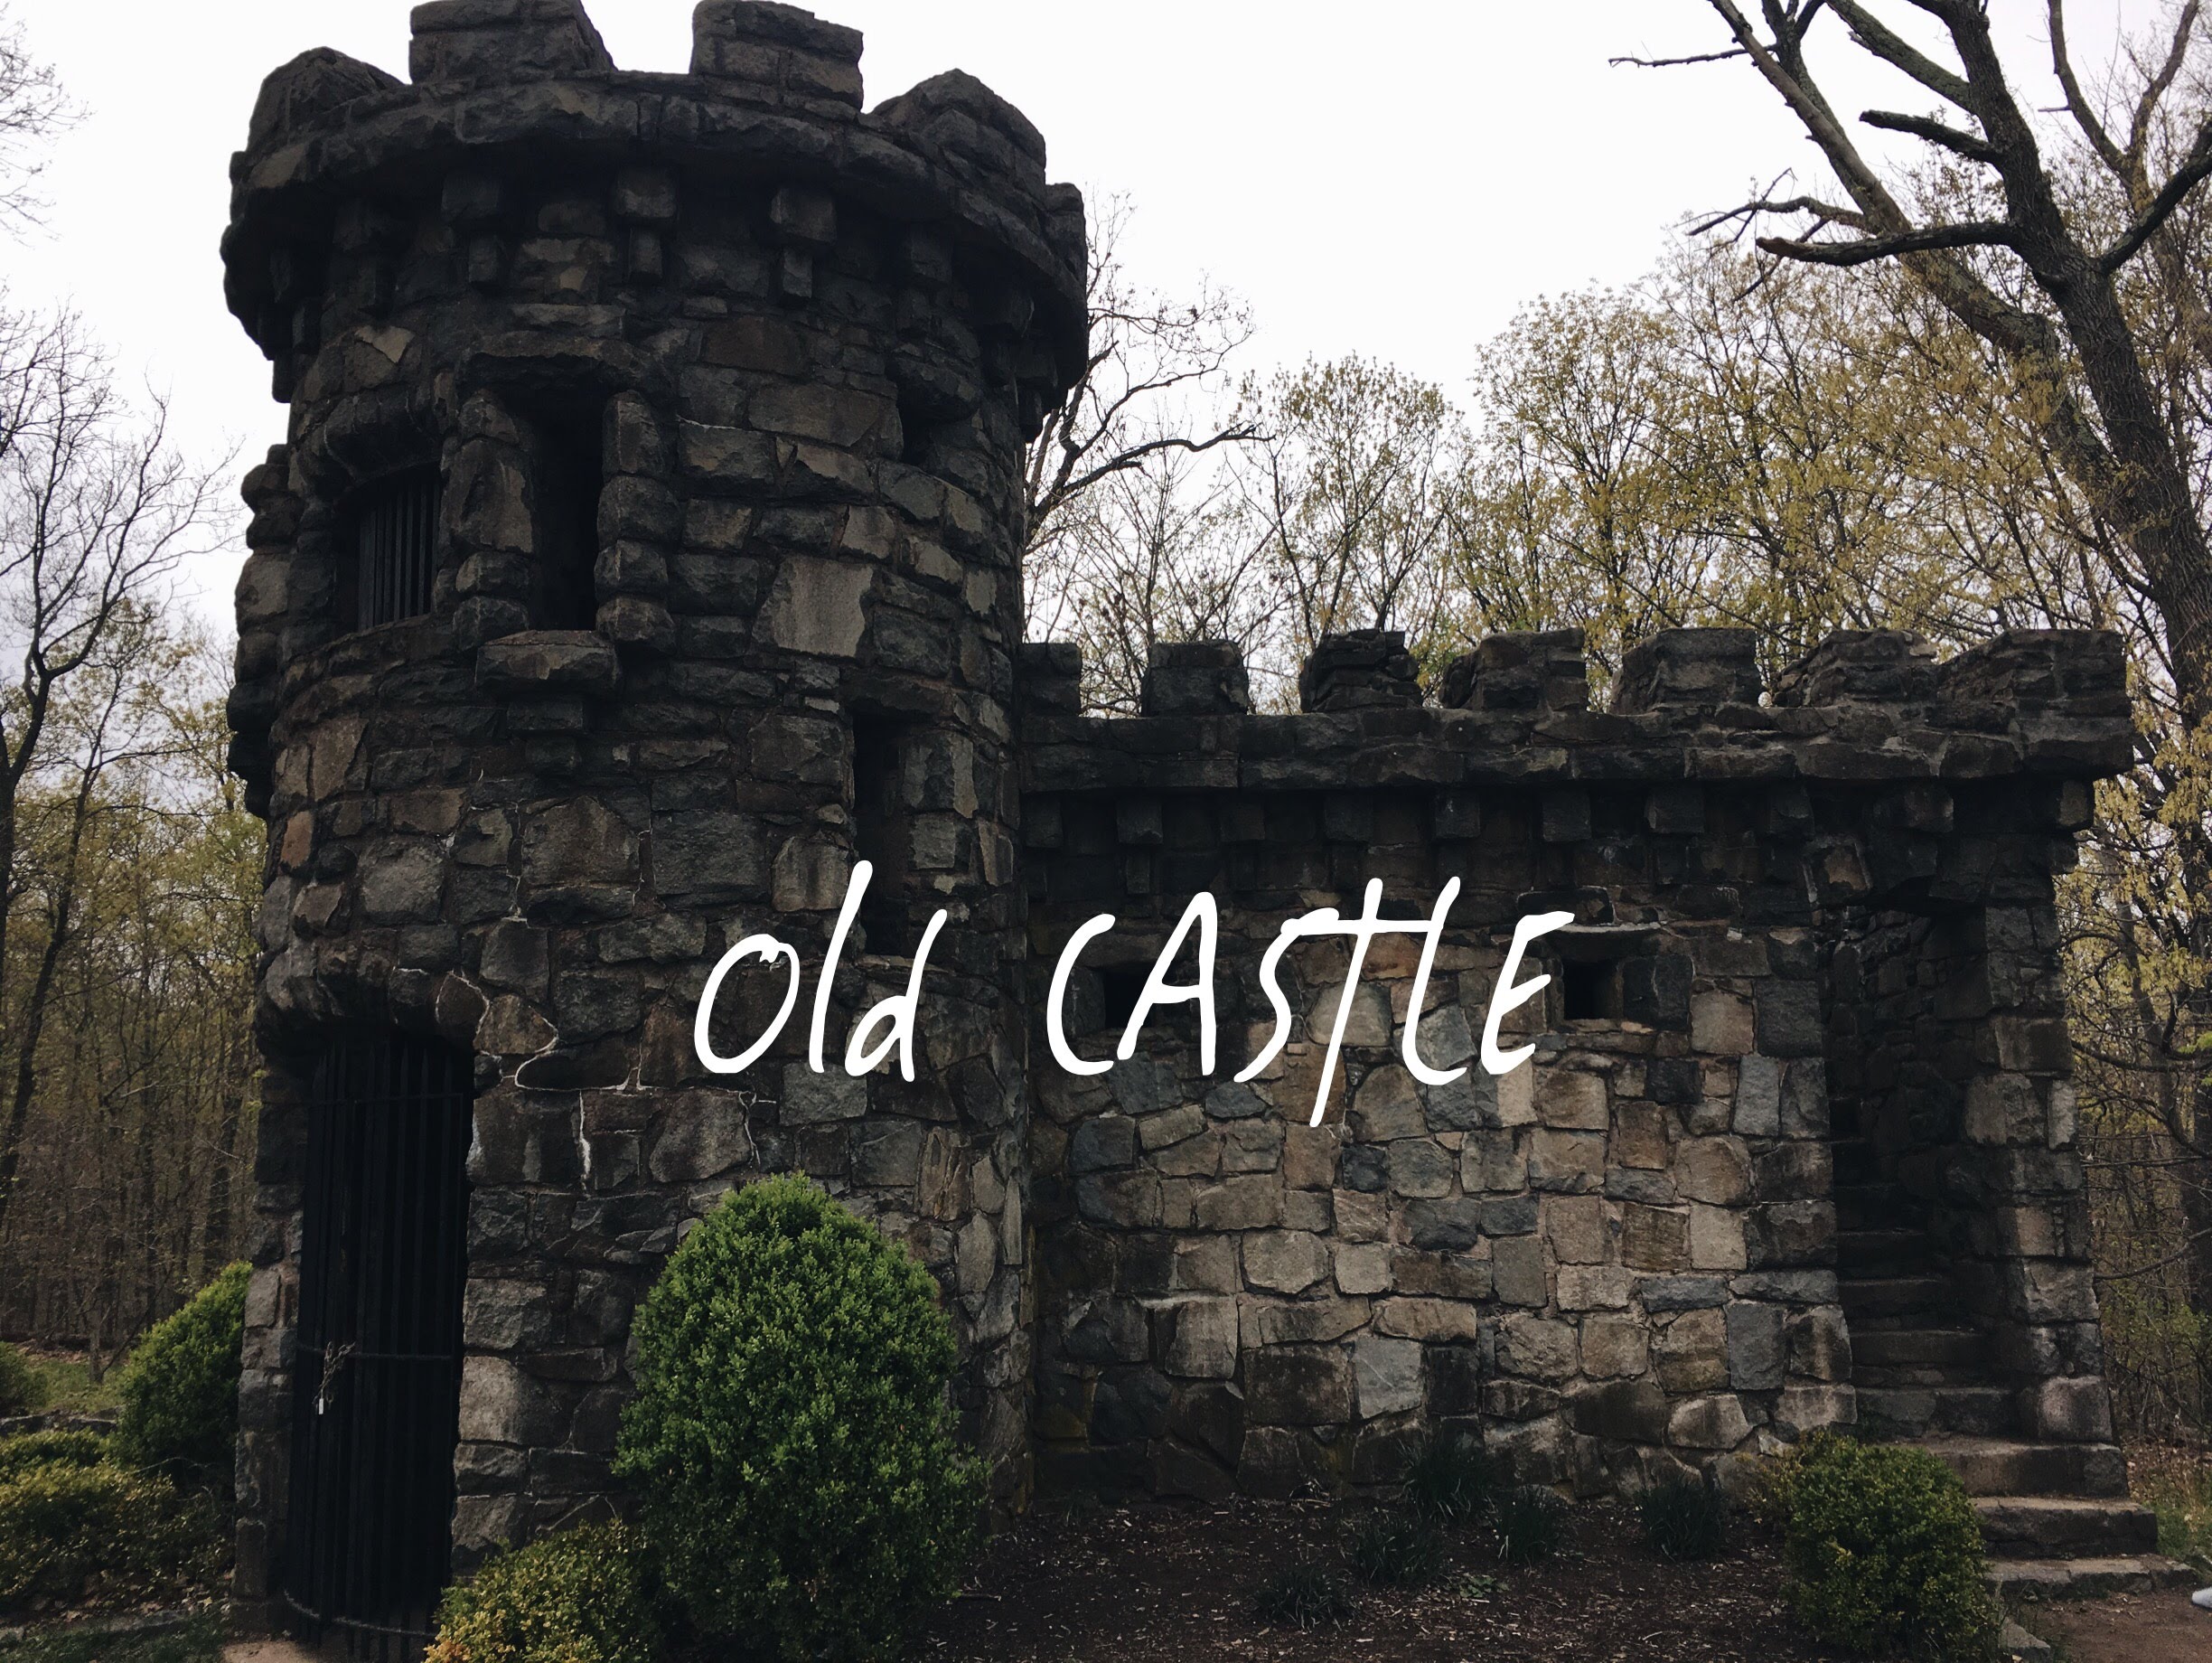 Exploring an Old Castle! - YouTube